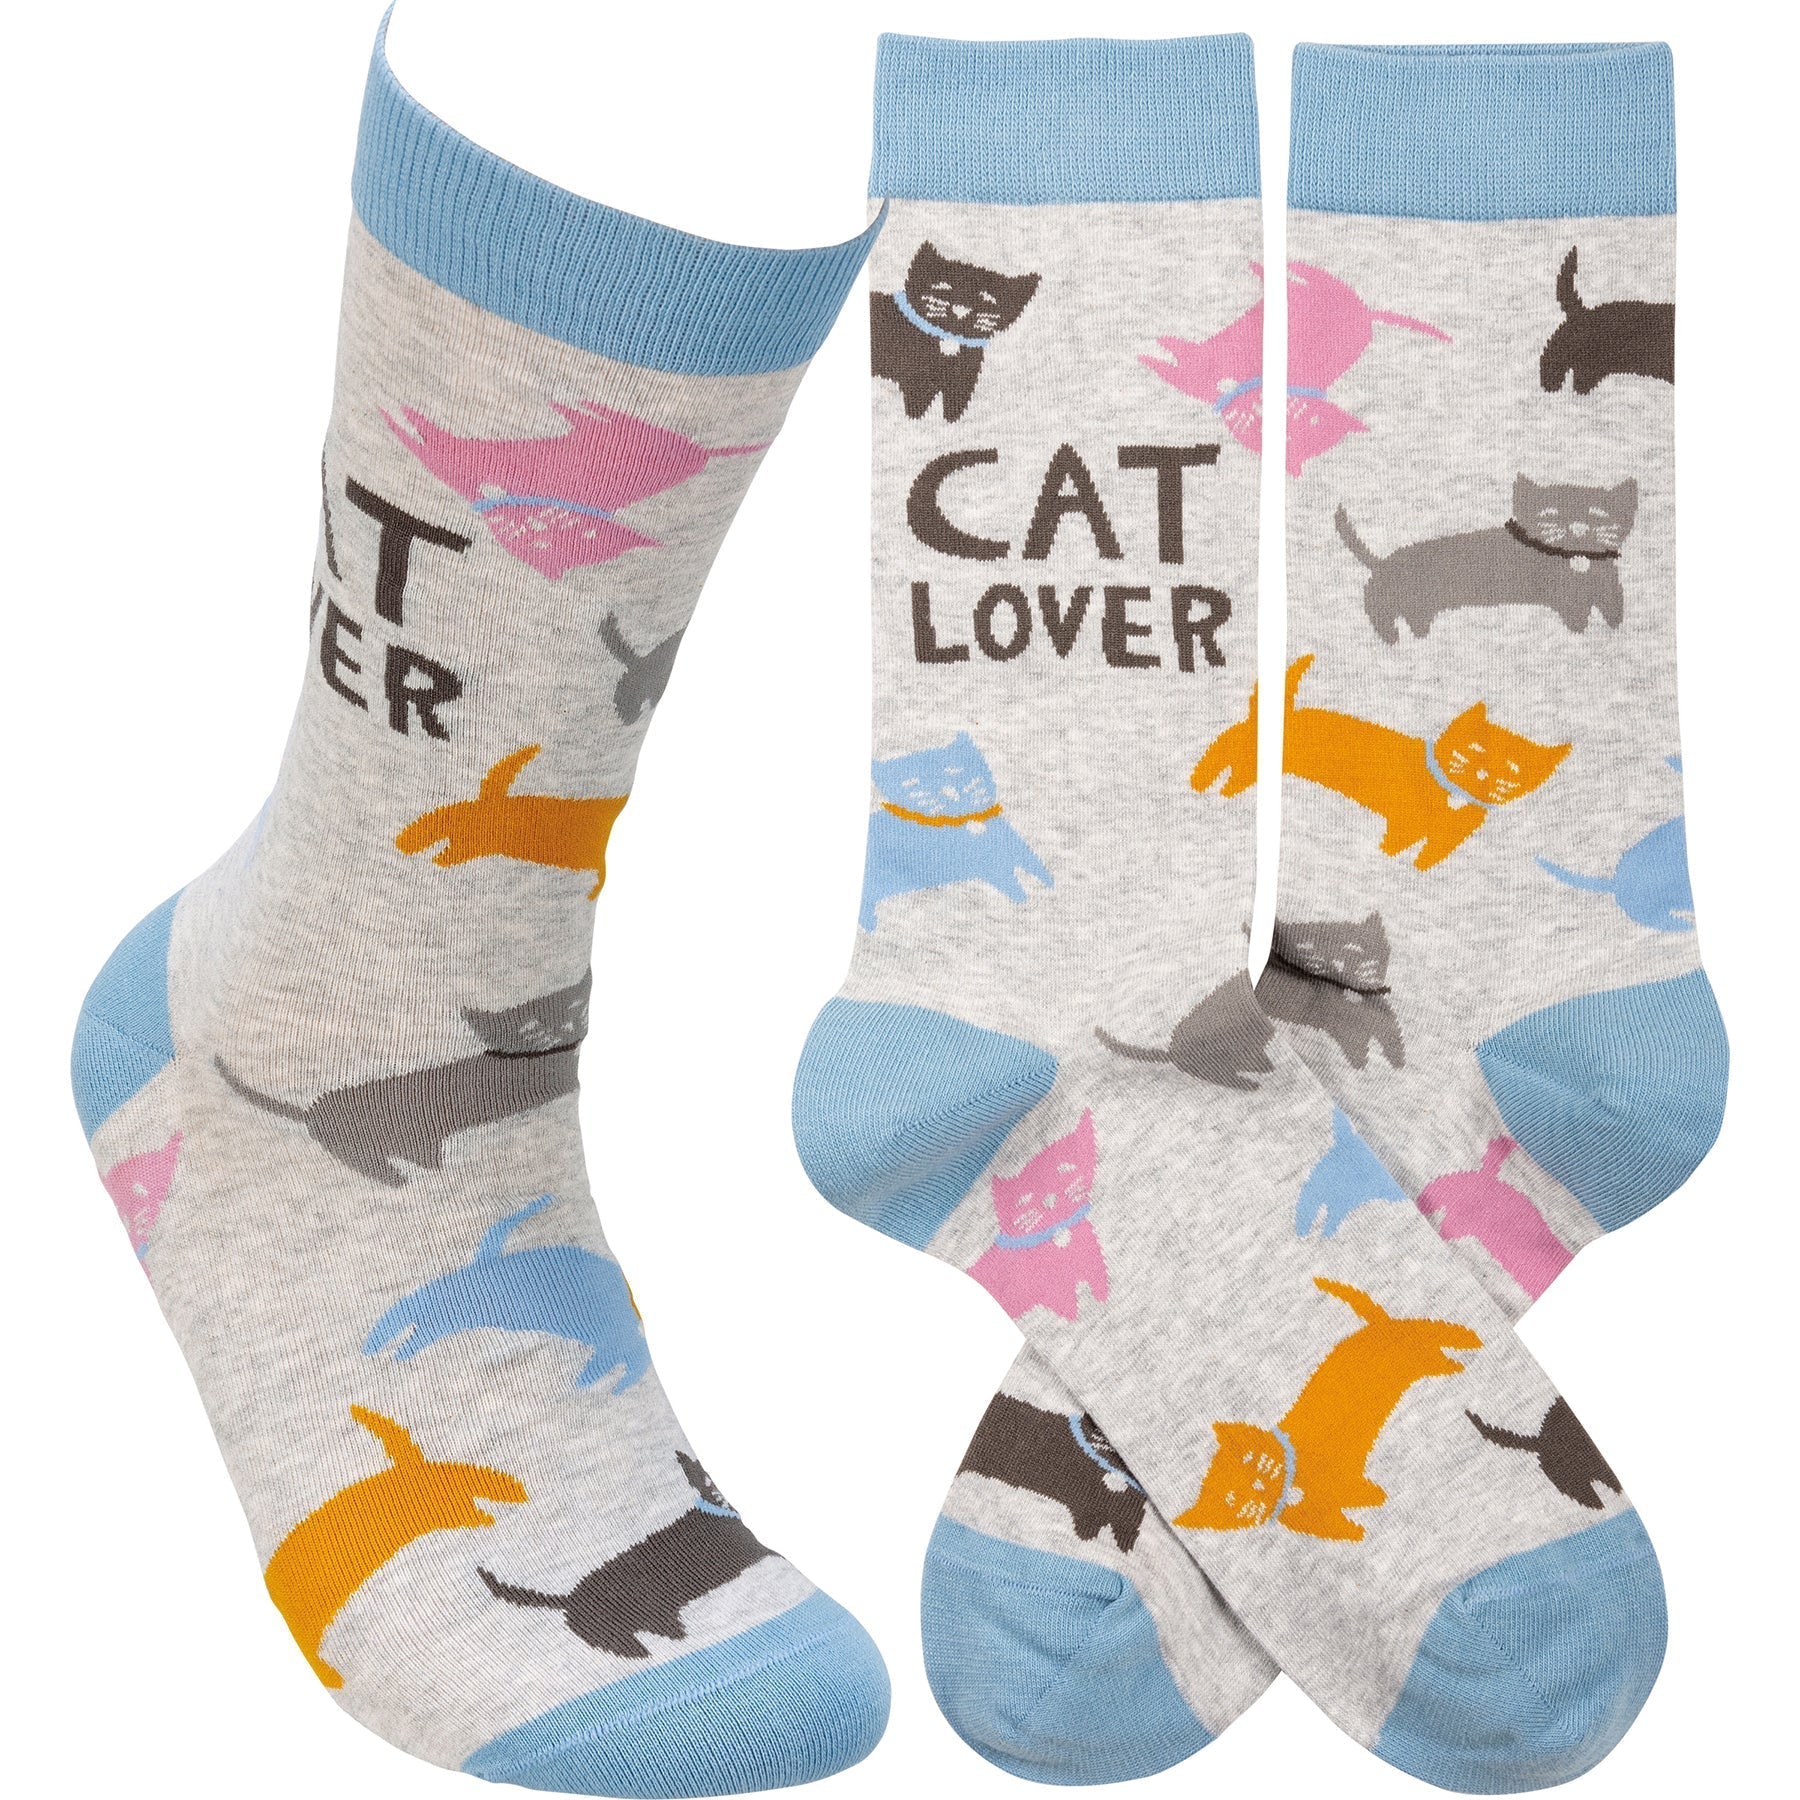 Cat Lover Socks Featuring An All Over Cat Print